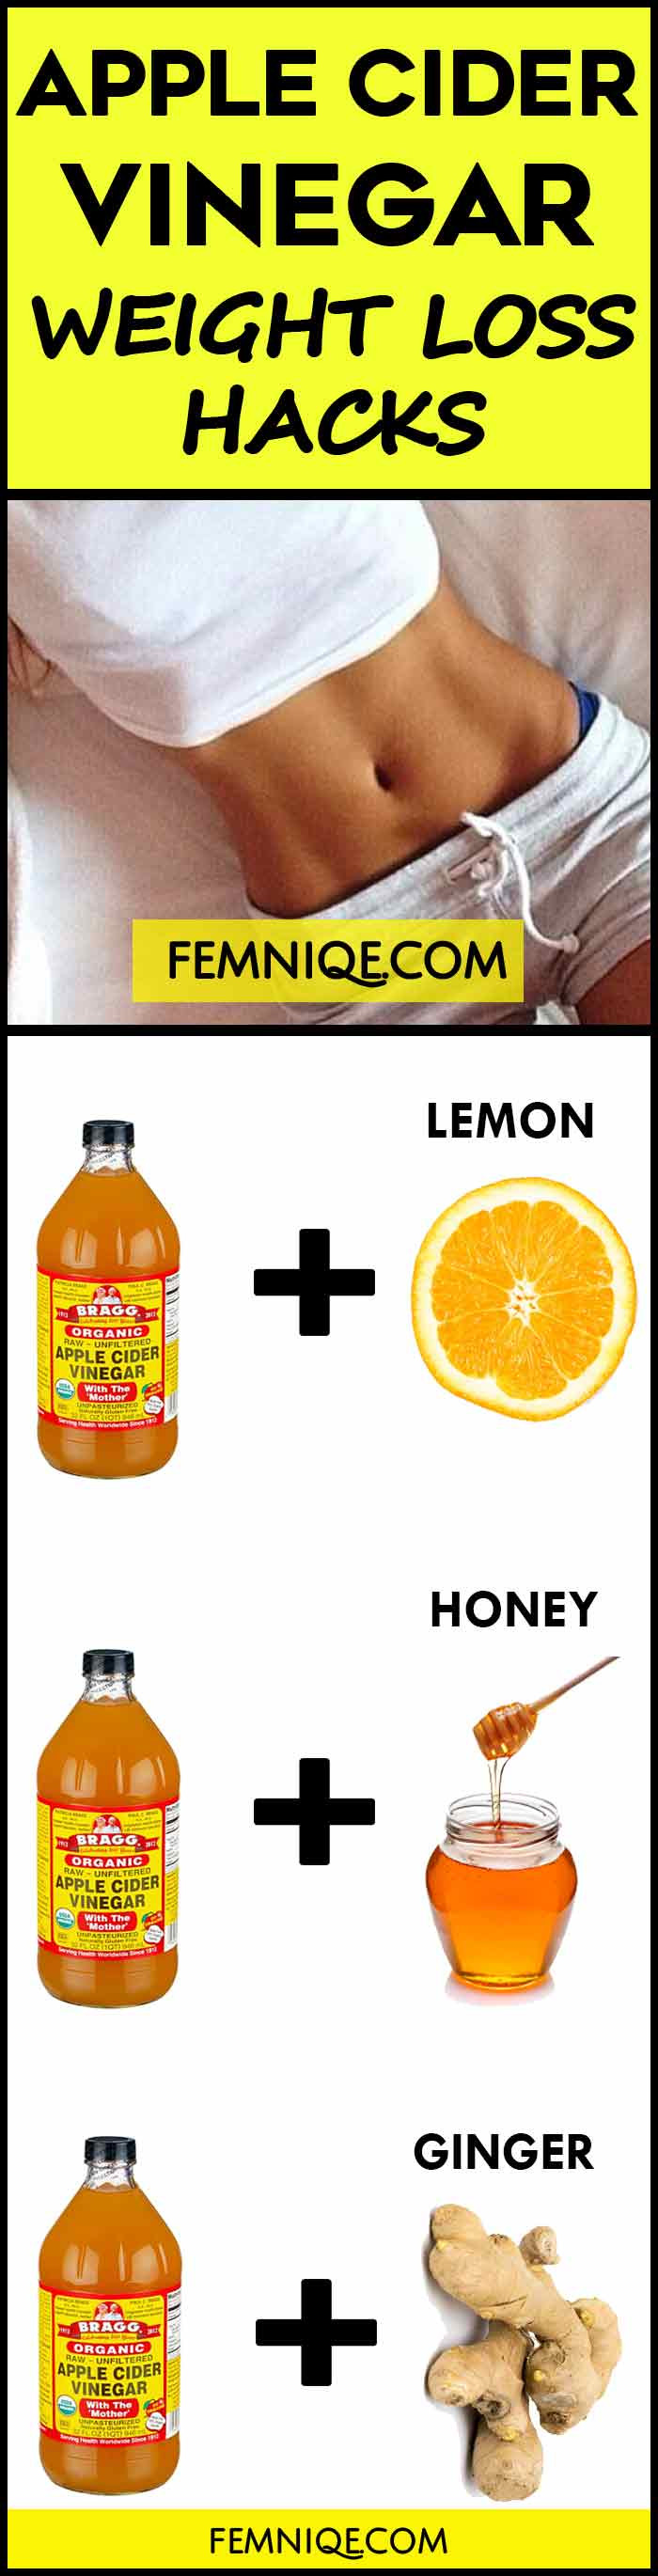 How Much Apple Cider Vinegar For Weight Loss
 How To Use Apple Cider Vinegar for Weight Loss Femniqe